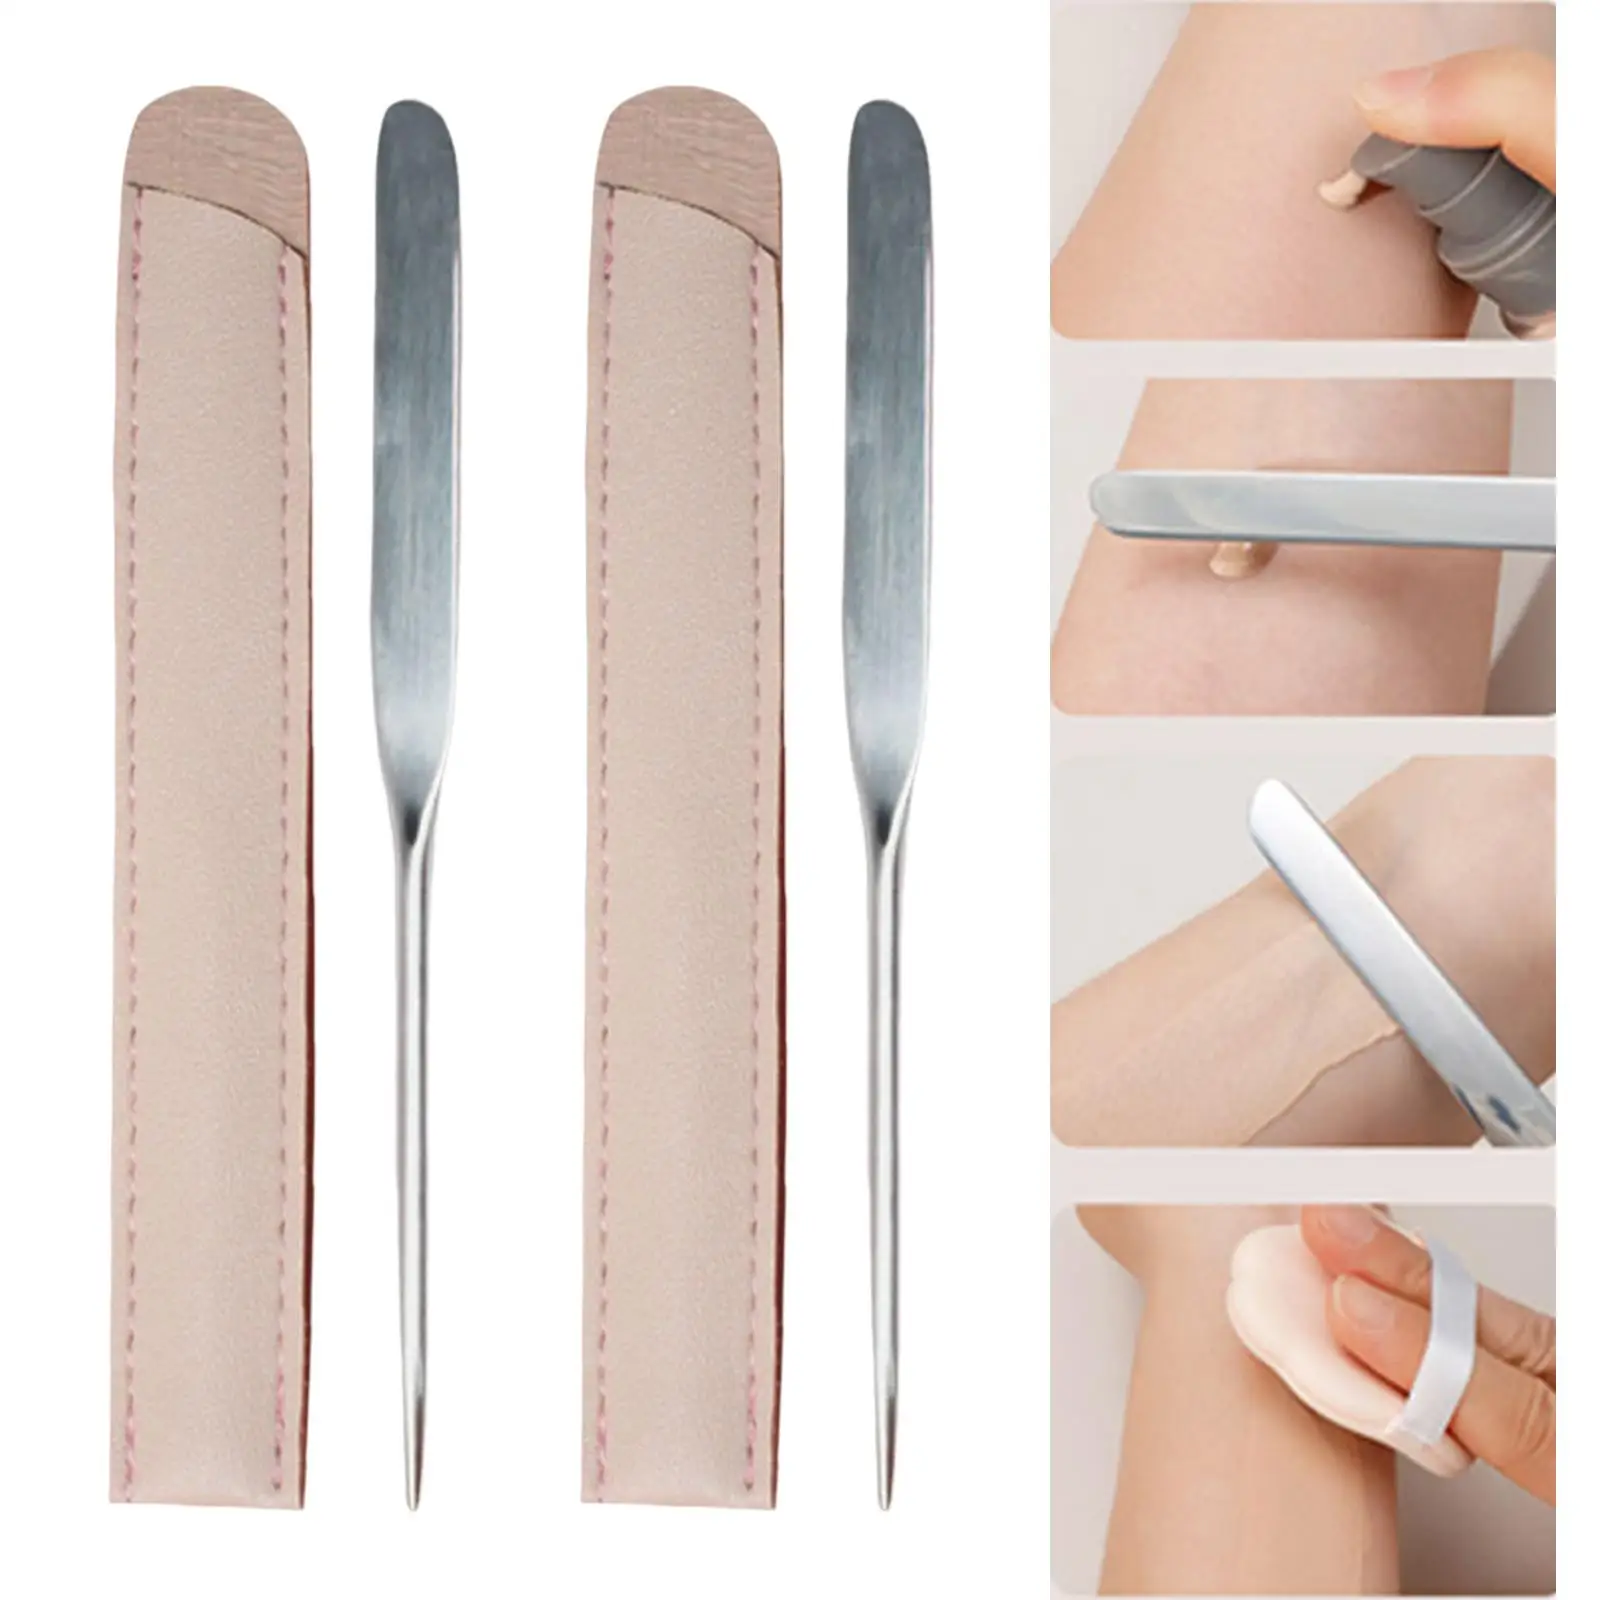 Stainless Steel Cosmetics Mixing Spatula with PU Leather Case Beauty Scoop Accessories for Eyeshadow, Skin Wax Household Use